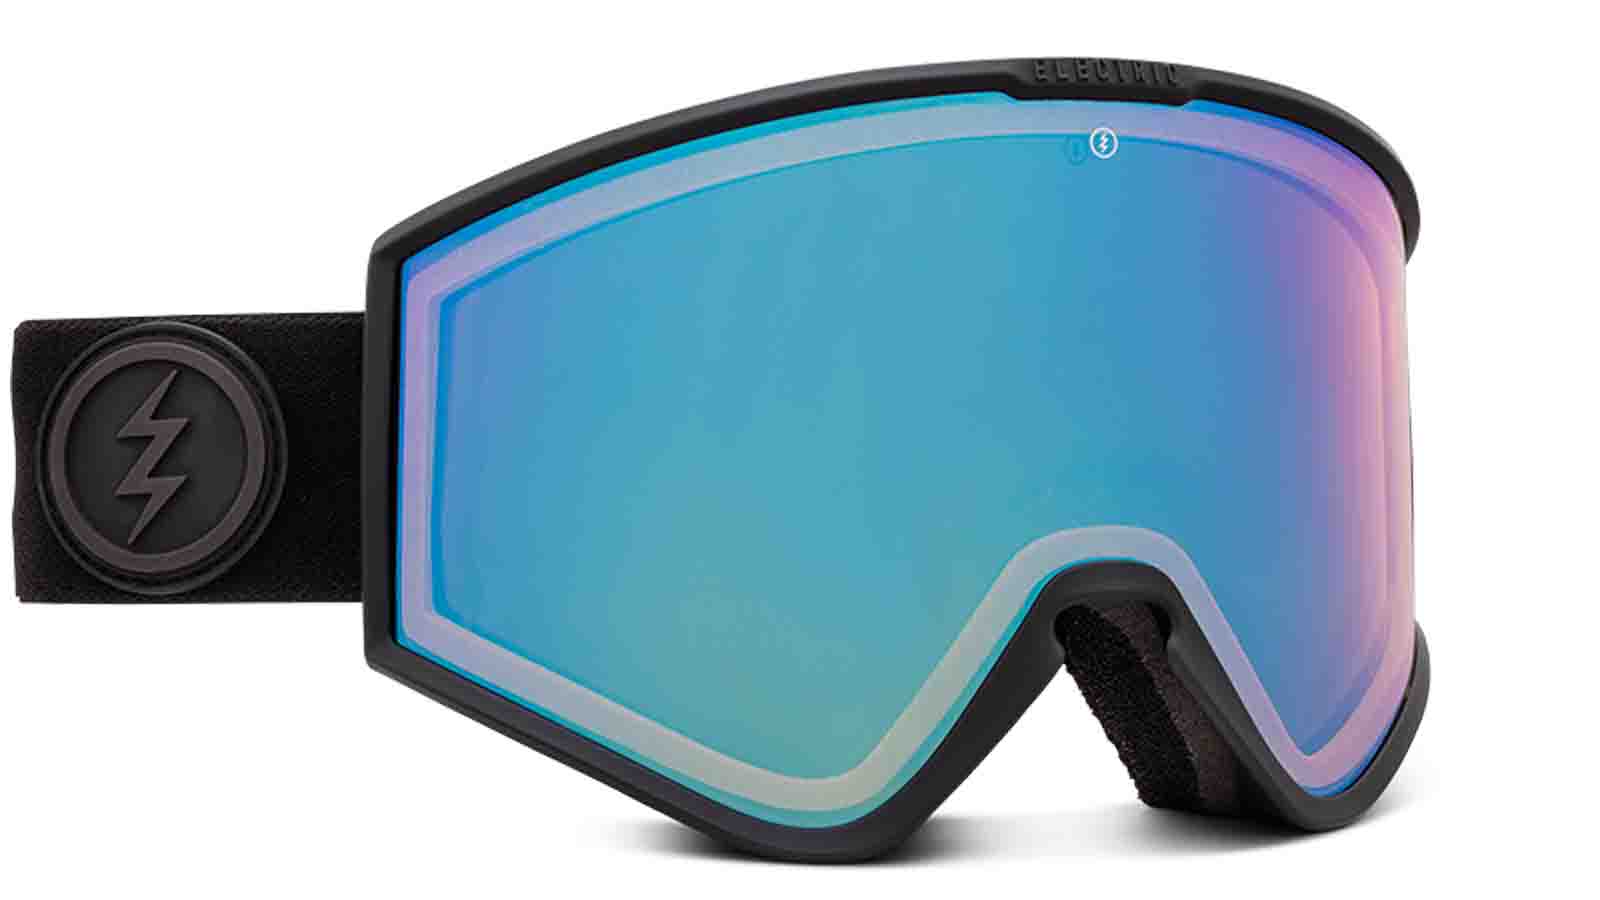 Electric 21/22 Goggles